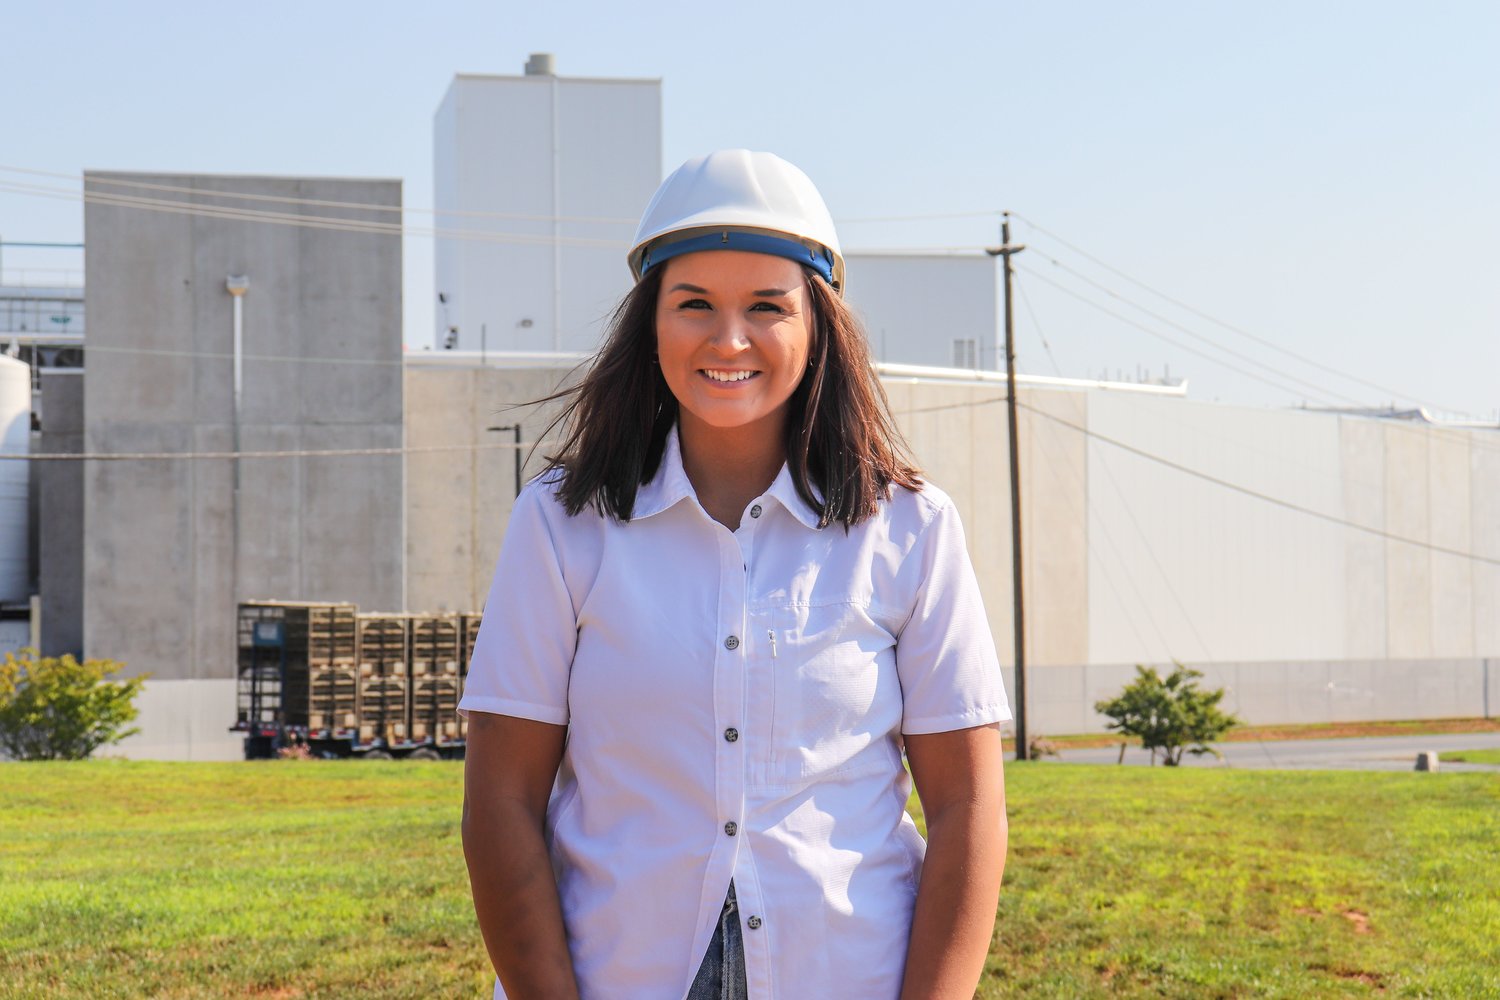 Sasha Duncan, shown here in front of Mountaire Farms’ Siler
City plant, is Mountaire’s new Siler City community relations
manager. She began her new role in early June.